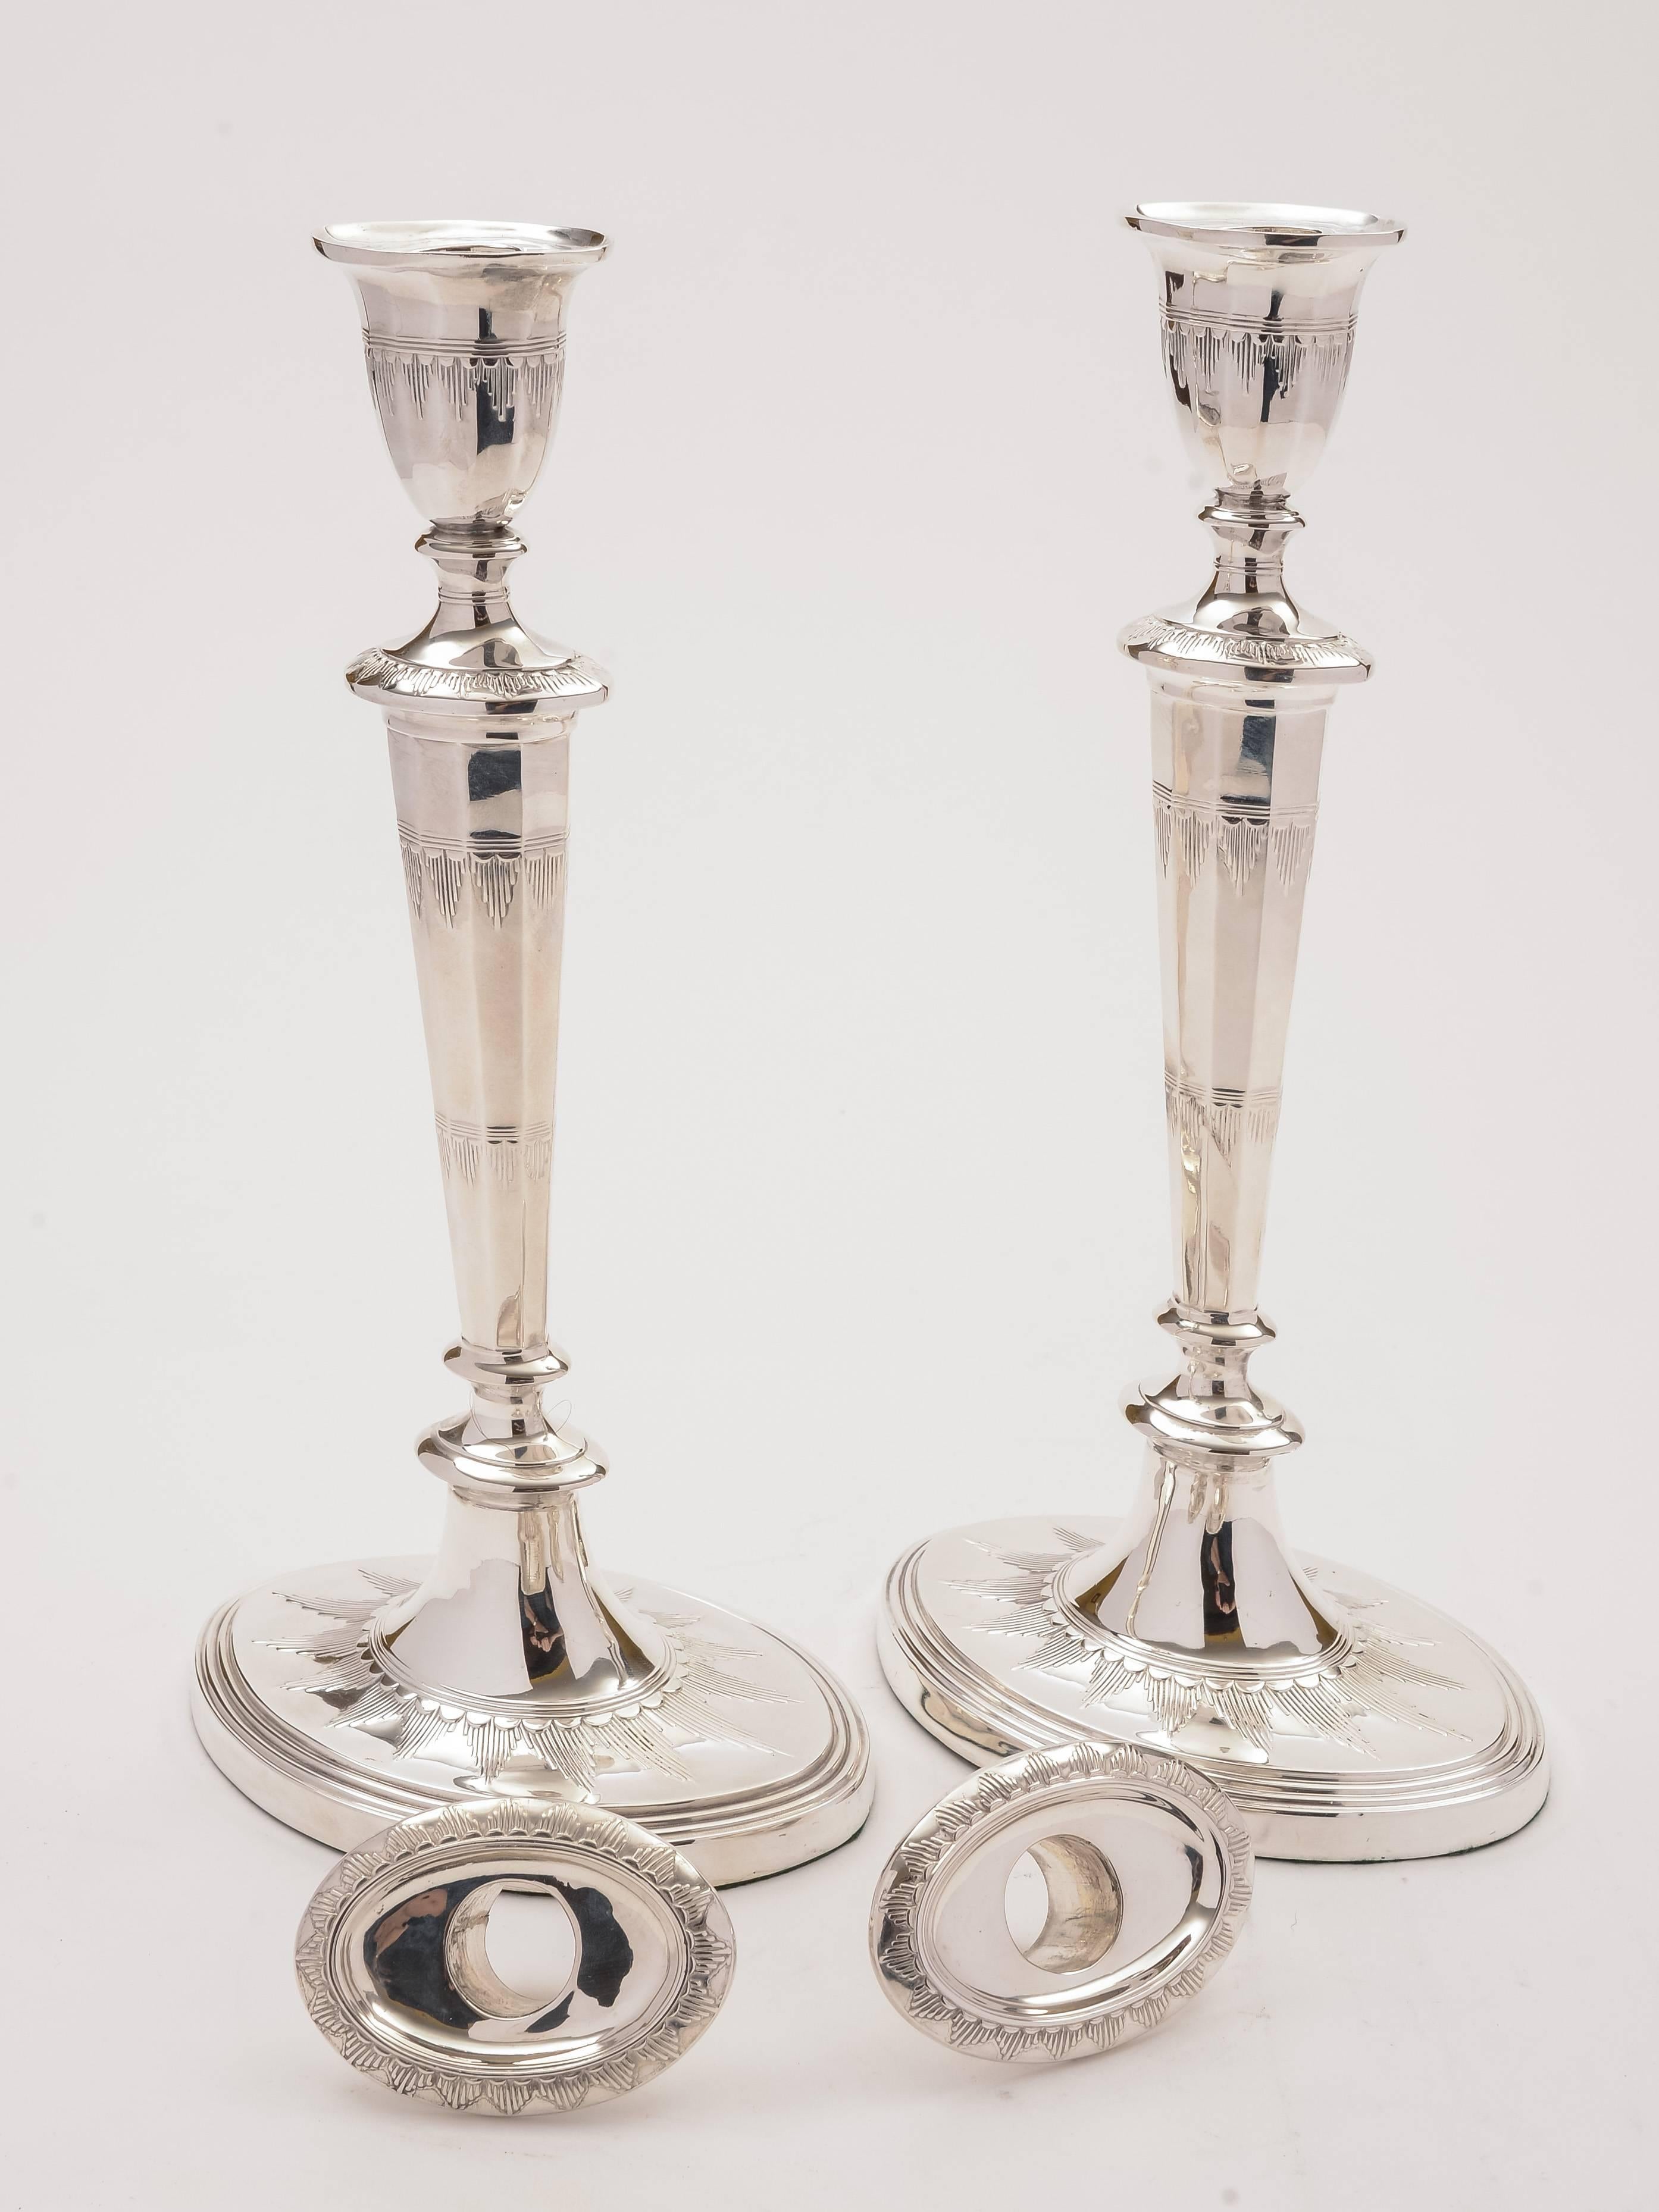 A lovely large pair of English Early Victorian, oval shaped silver-on-copper plated candlesticks with detachable sconces, circa 1850.

Total weight: 1400g.

